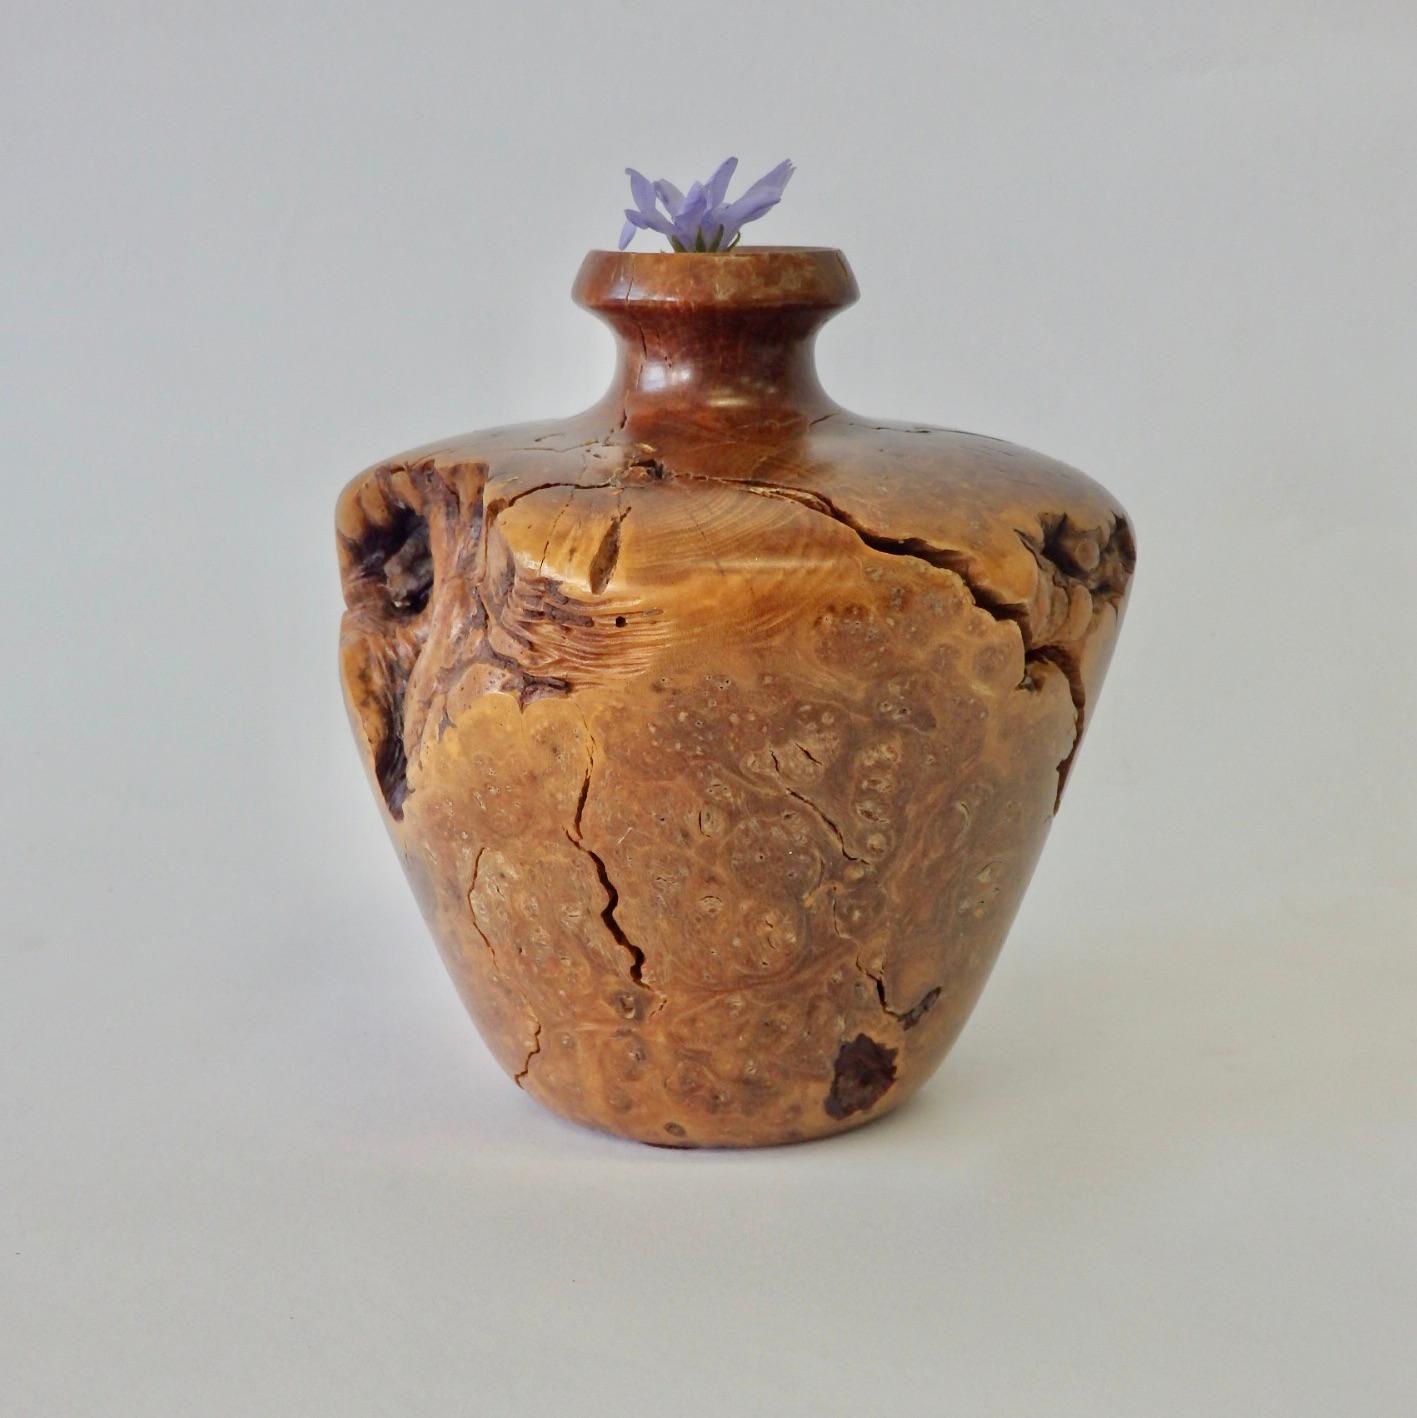 Nicely turned burl wood weed pot. Shows quartz stone caught during growth.